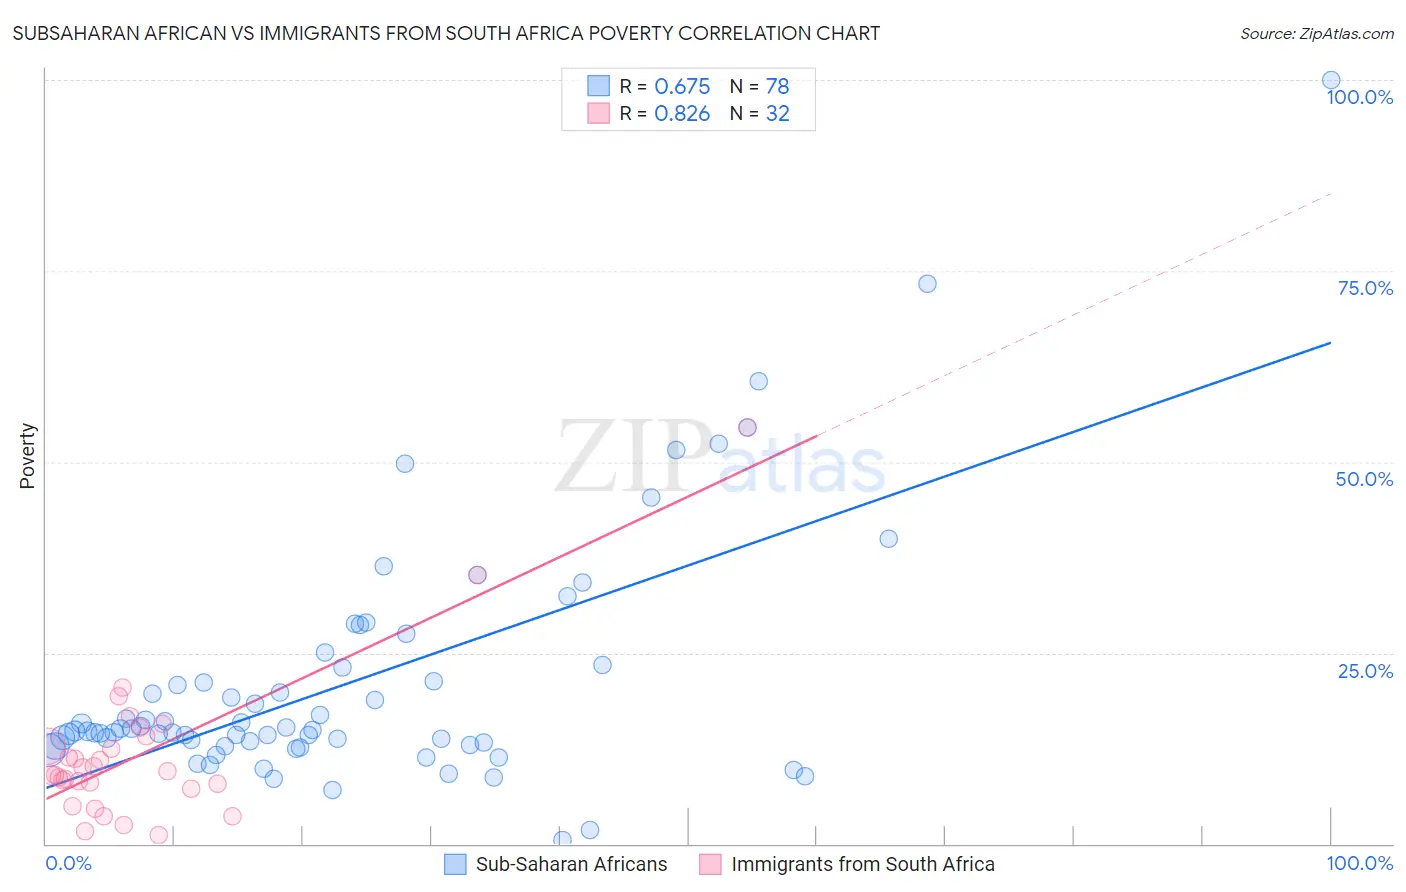 Subsaharan African vs Immigrants from South Africa Poverty